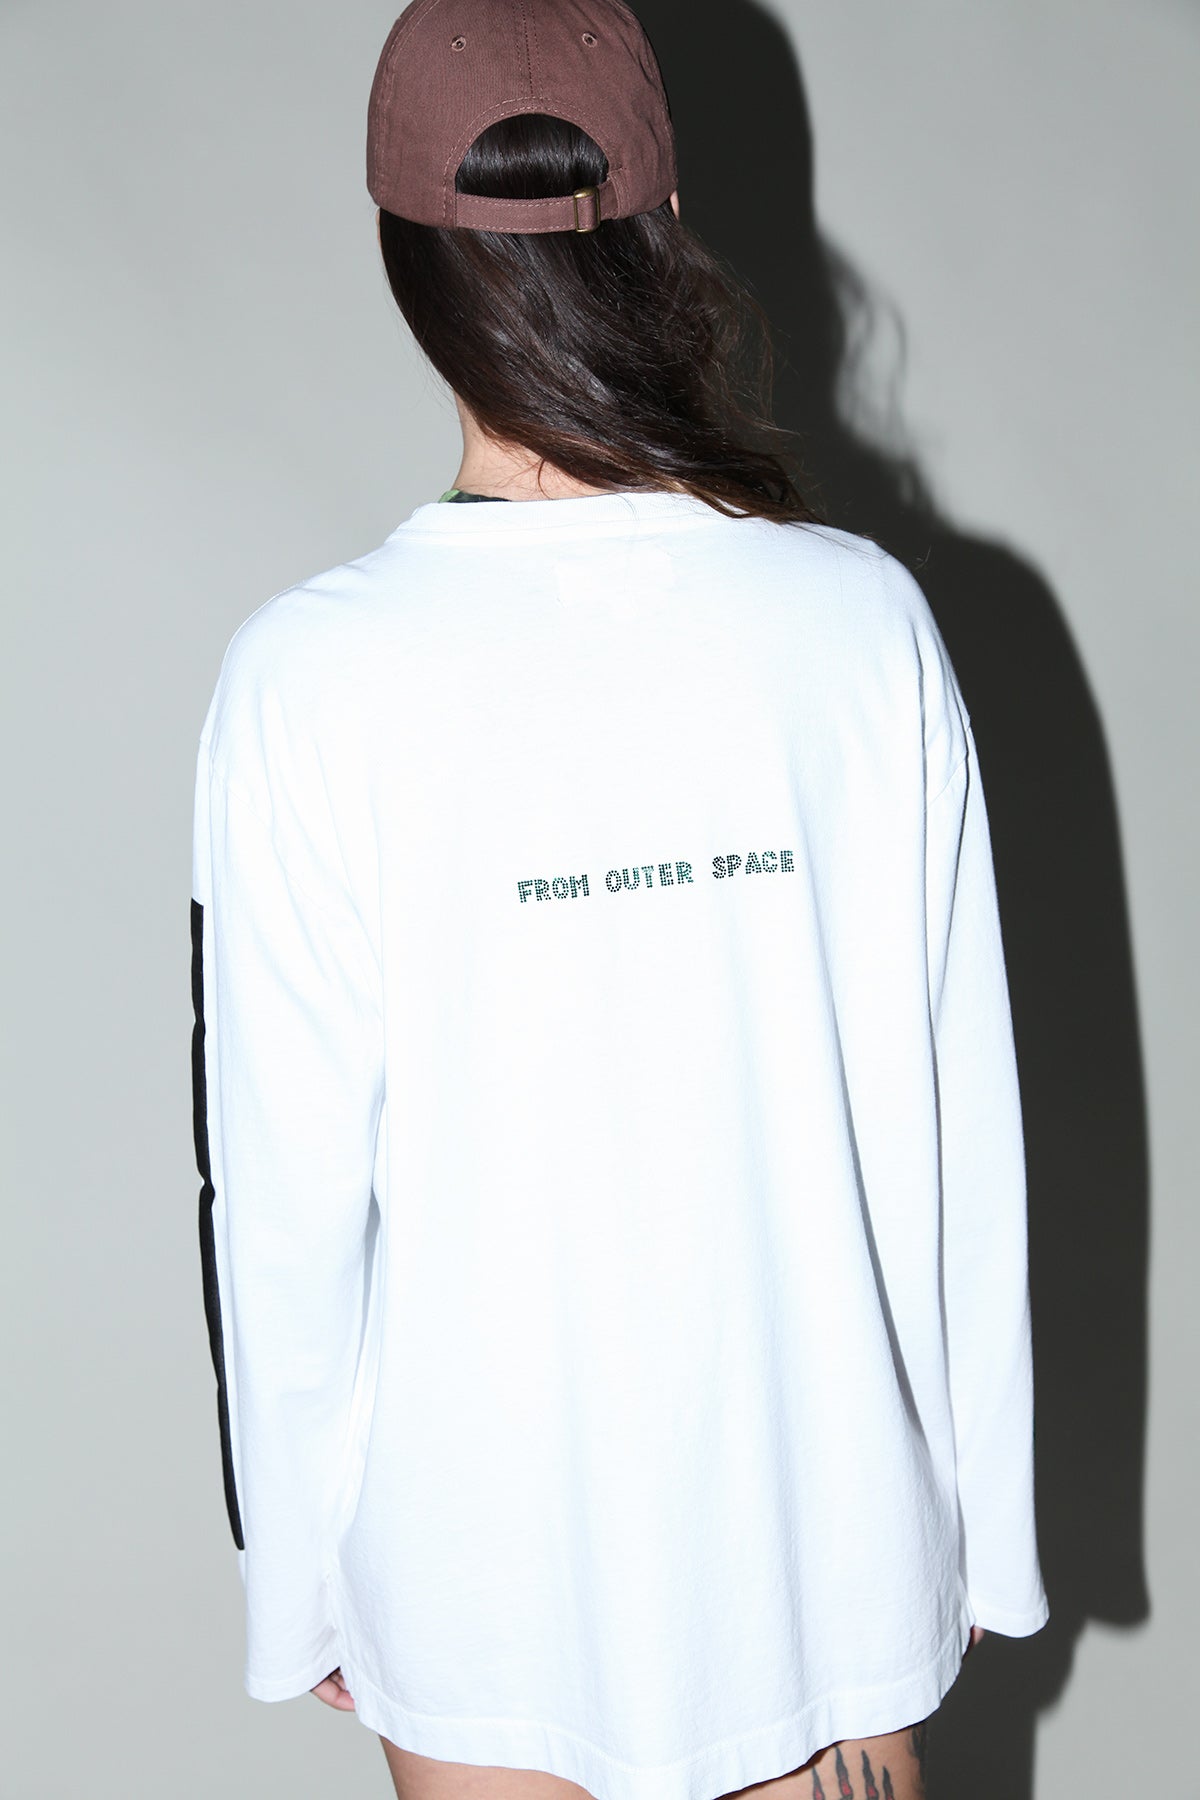 Rhinestone 'From Outer Space' Tee in White